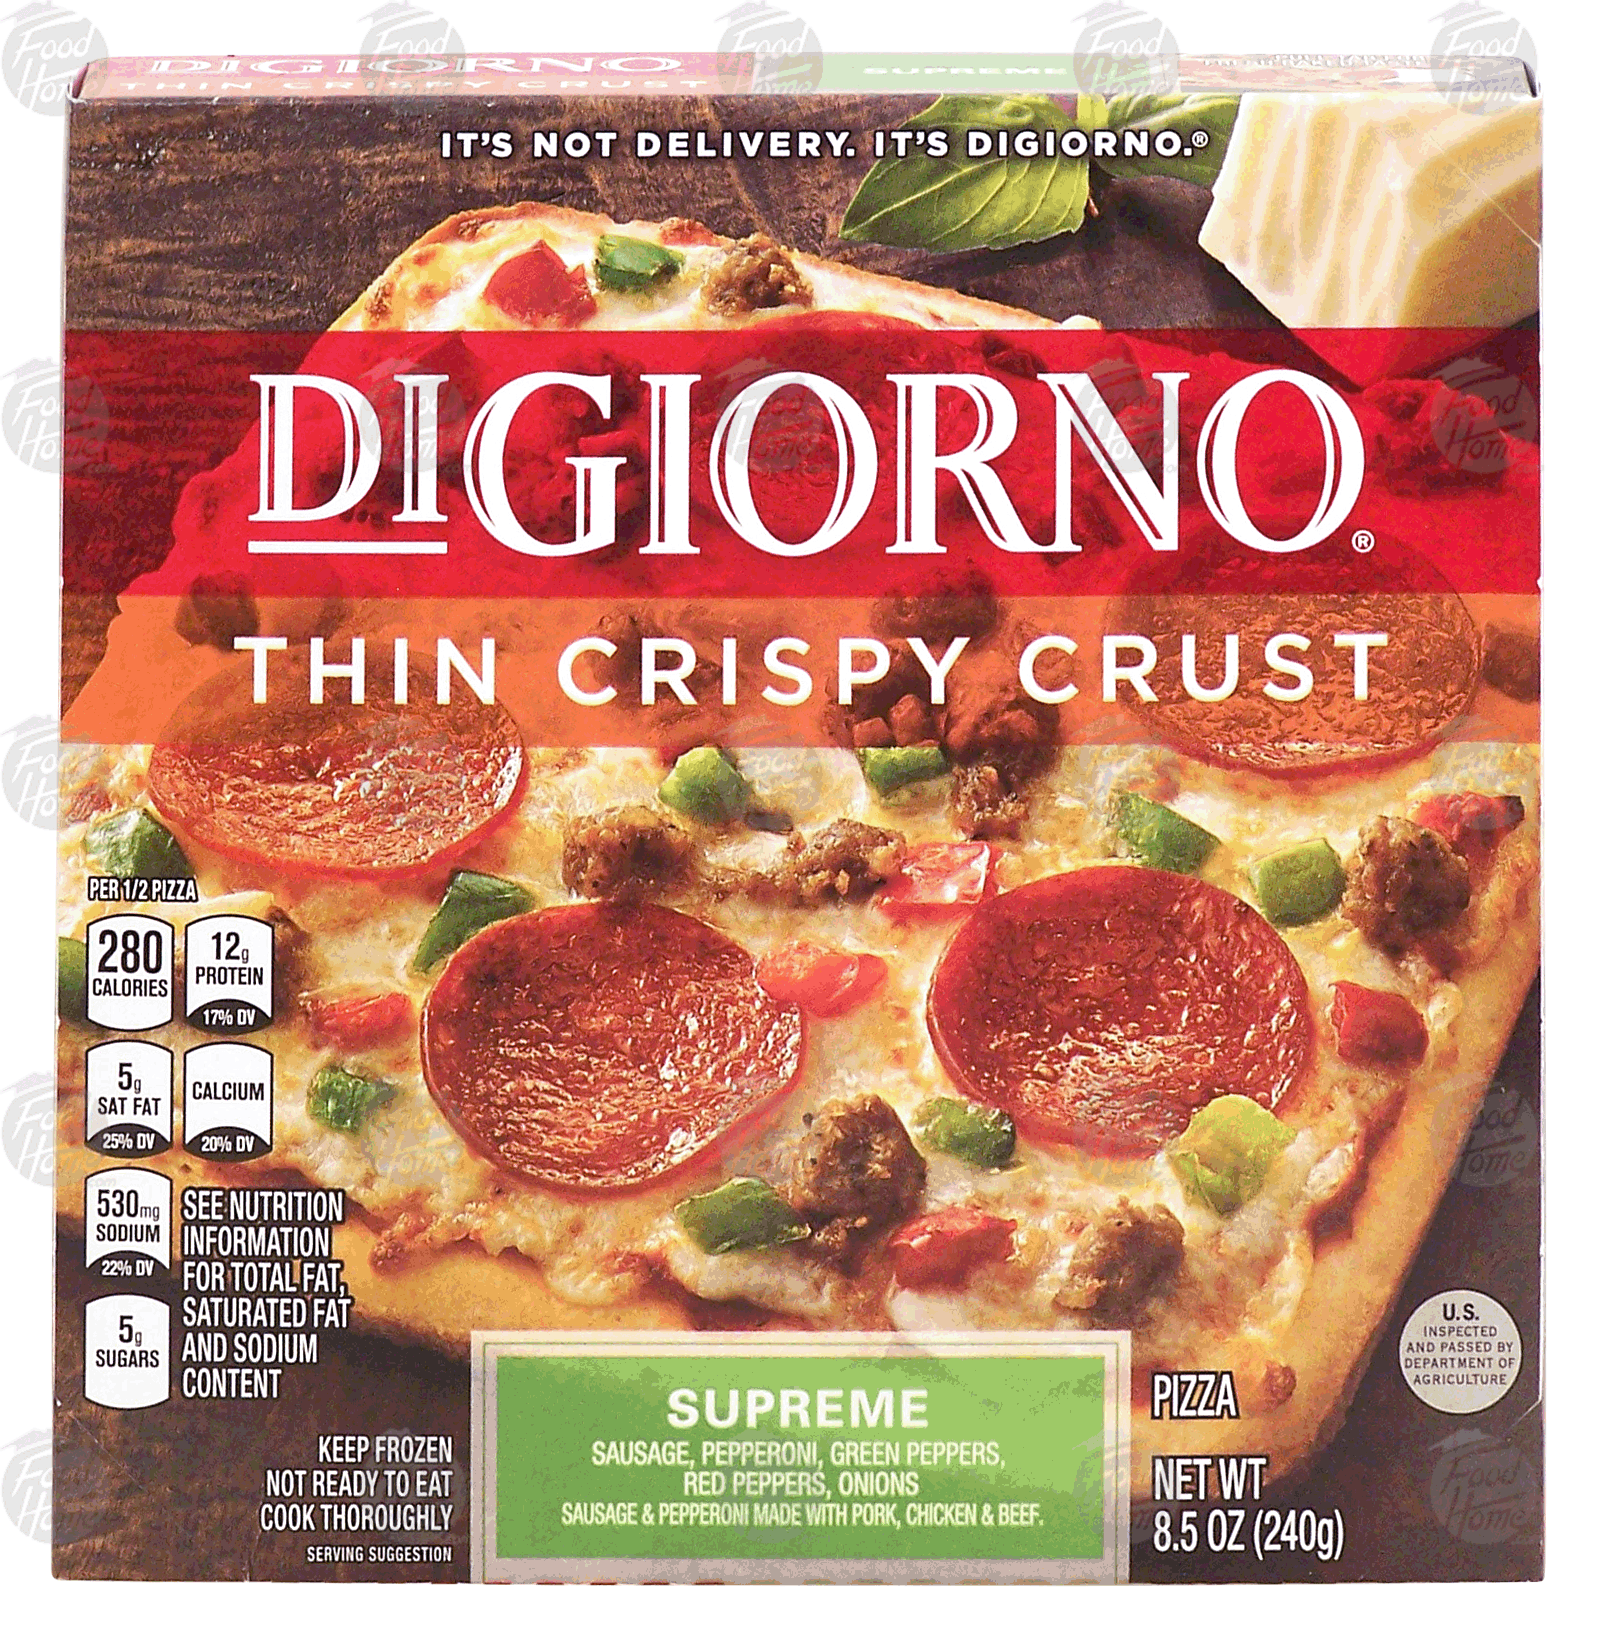 Digiorno Thin Crispy Crust supreme pizza with sausage, pepperoni, green peppers, red peppers & onions Full-Size Picture